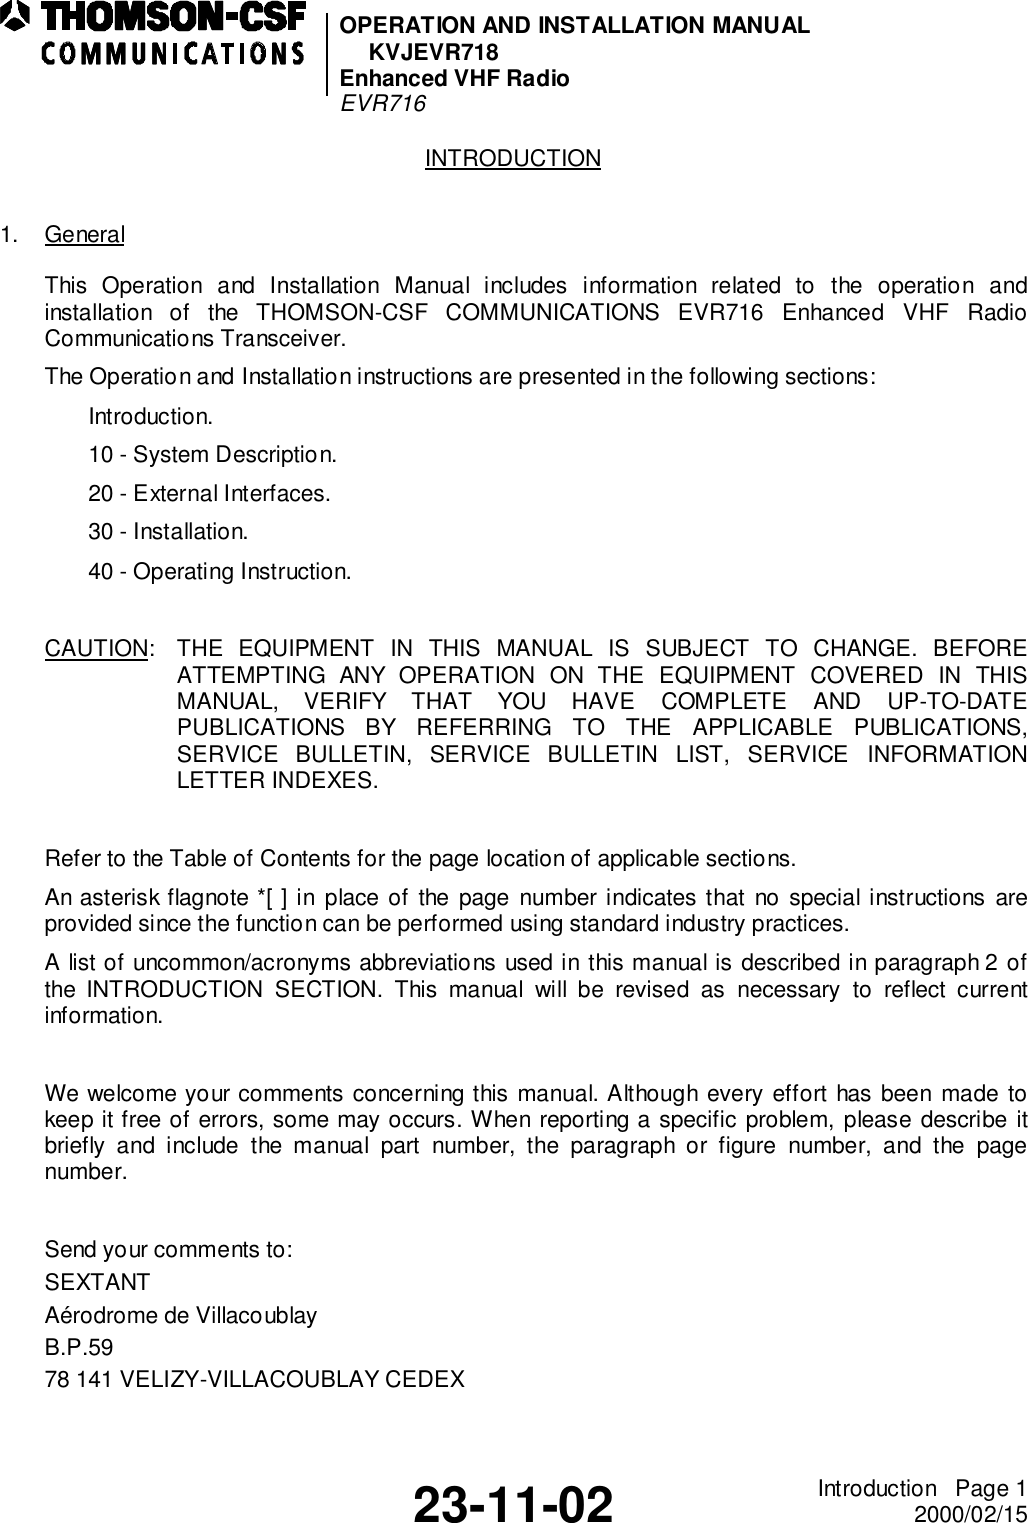 OPERATION AND INSTALLATION MANUALKVJEVR718Enhanced VHF RadioEVR71623-11-02 Introduction   Page 12000/02/15INTRODUCTION1. GeneralThis Operation and Installation Manual includes information related to the operation andinstallation of the THOMSON-CSF COMMUNICATIONS EVR716 Enhanced VHF RadioCommunications Transceiver.The Operation and Installation instructions are presented in the following sections:Introduction.10 - System Description.20 - External Interfaces.30 - Installation.40 - Operating Instruction.CAUTION: THE EQUIPMENT IN THIS MANUAL IS SUBJECT TO CHANGE. BEFOREATTEMPTING ANY OPERATION ON THE EQUIPMENT COVERED IN THISMANUAL, VERIFY THAT YOU HAVE COMPLETE AND UP-TO-DATEPUBLICATIONS BY REFERRING TO THE APPLICABLE PUBLICATIONS,SERVICE BULLETIN, SERVICE BULLETIN LIST, SERVICE INFORMATIONLETTER INDEXES.Refer to the Table of Contents for the page location of applicable sections.An asterisk flagnote *[ ] in place of the page number indicates that no special instructions areprovided since the function can be performed using standard industry practices.A list of uncommon/acronyms abbreviations used in this manual is described in paragraph 2 ofthe INTRODUCTION SECTION. This manual will be revised as necessary to reflect currentinformation.We welcome your comments concerning this manual. Although every effort has been made tokeep it free of errors, some may occurs. When reporting a specific problem, please describe itbriefly and include the manual part number, the paragraph or figure number, and the pagenumber.Send your comments to:SEXTANTAérodrome de VillacoublayB.P.5978 141 VELIZY-VILLACOUBLAY CEDEX